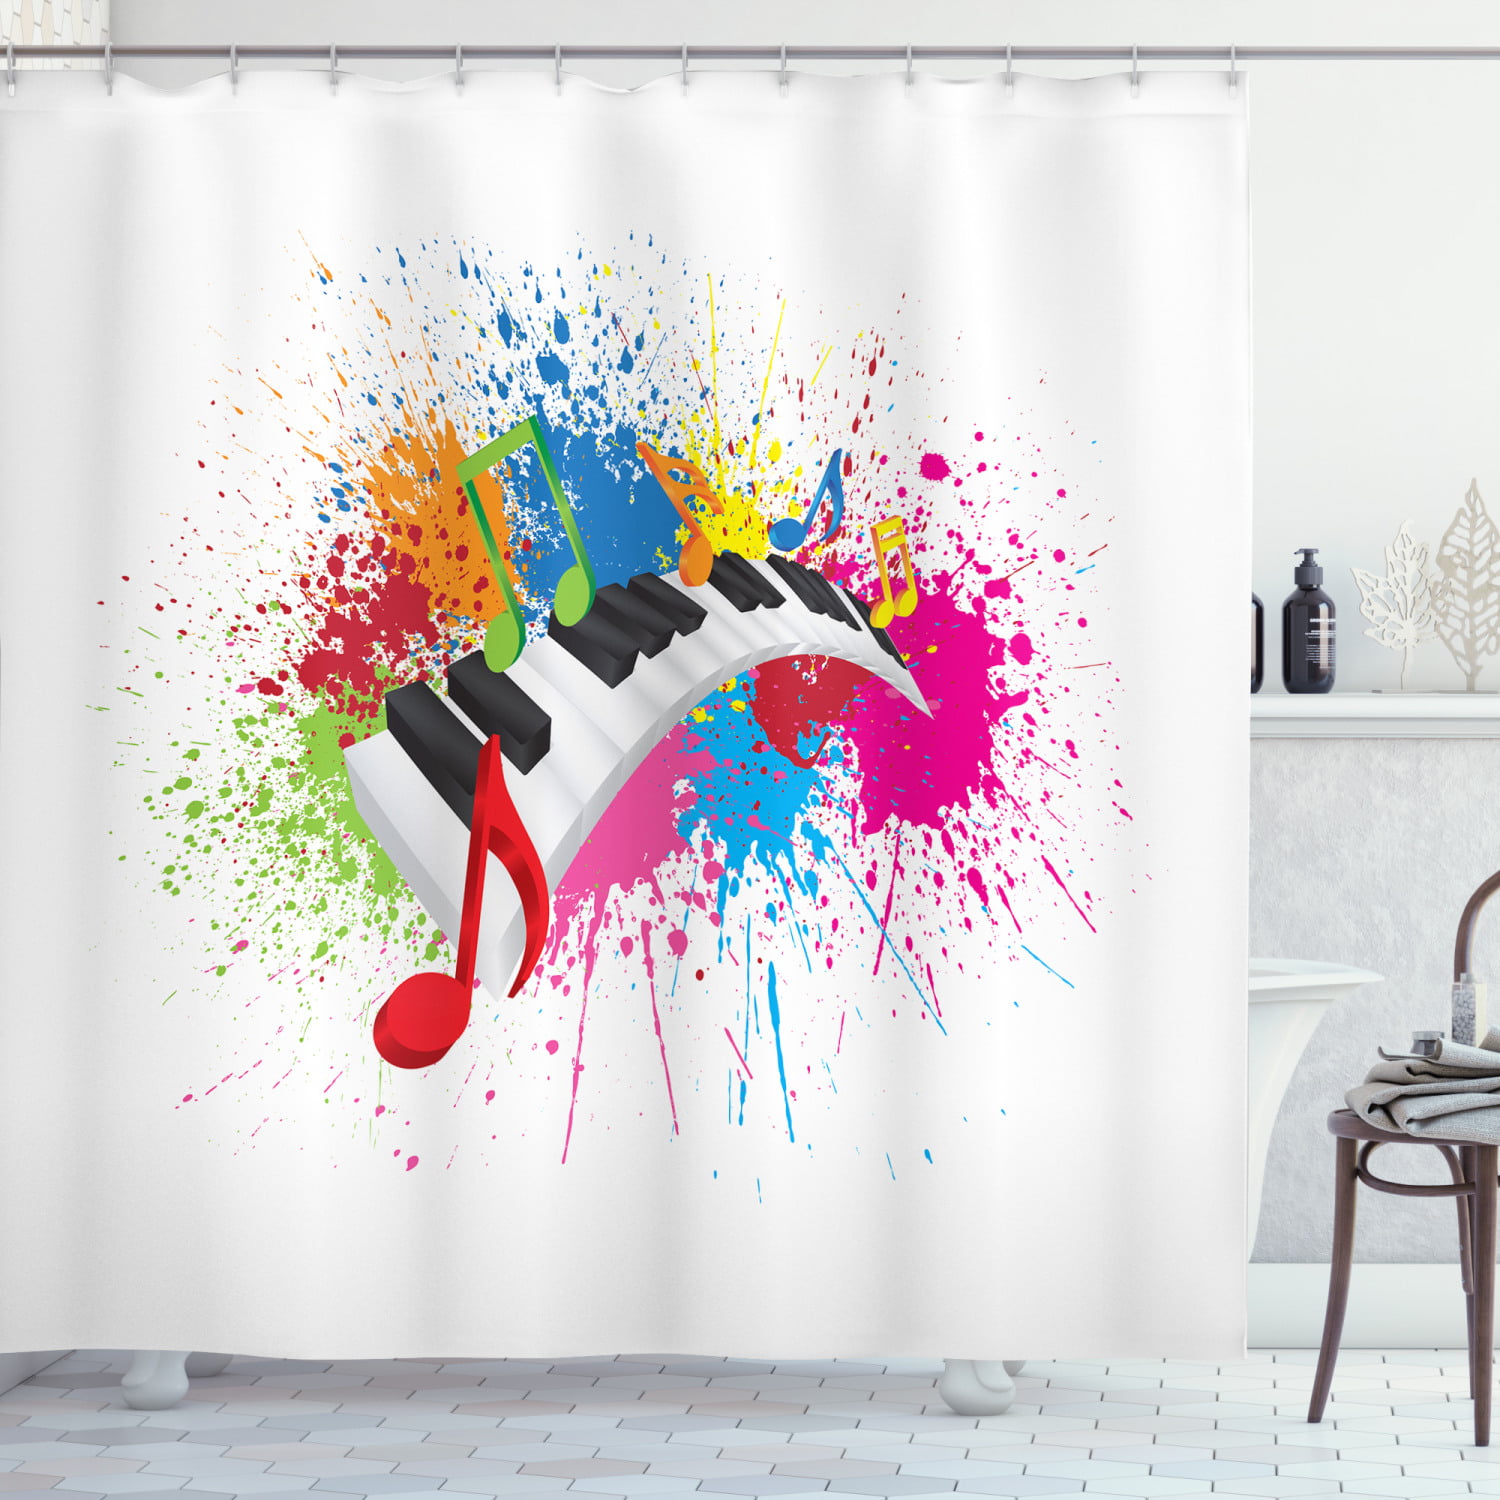 Shower Curtain Abstract Design, How To Paint A Fabric Shower Curtain